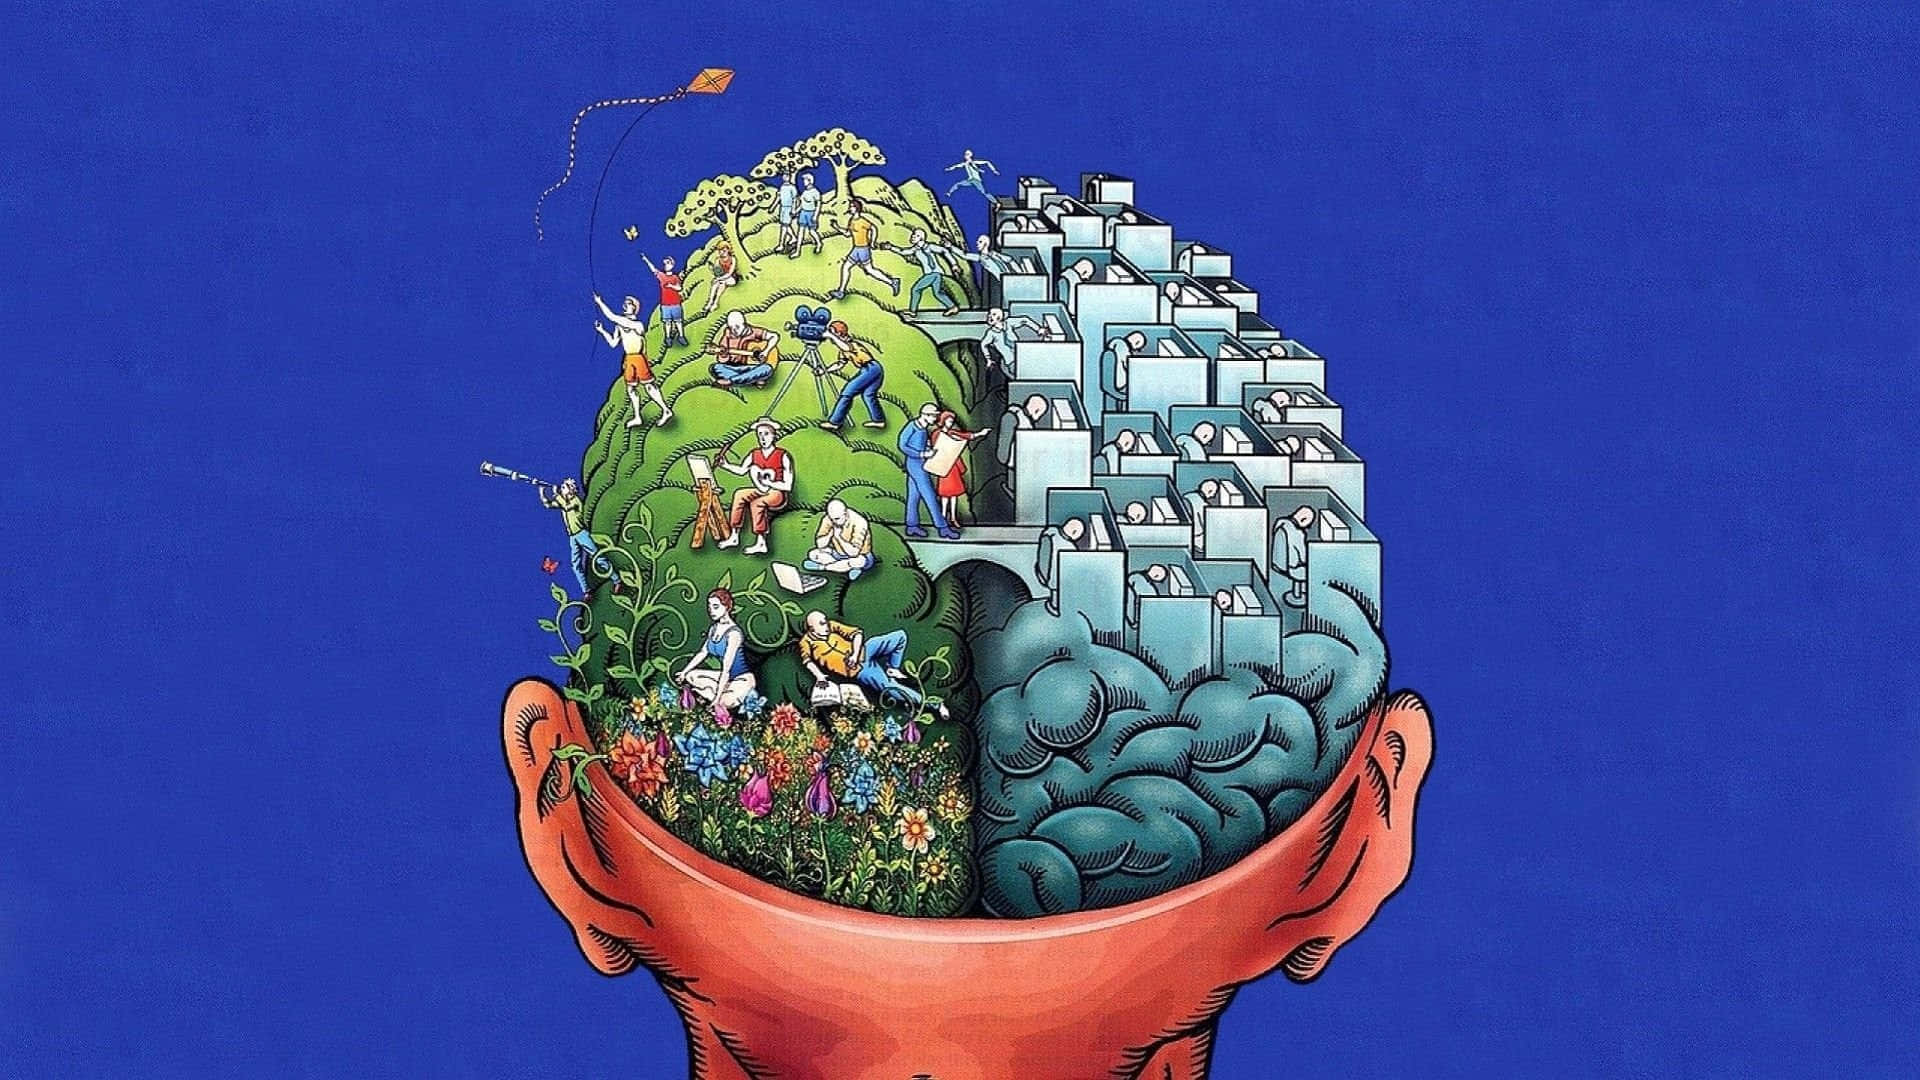 A Man's Head With A City Inside Of It